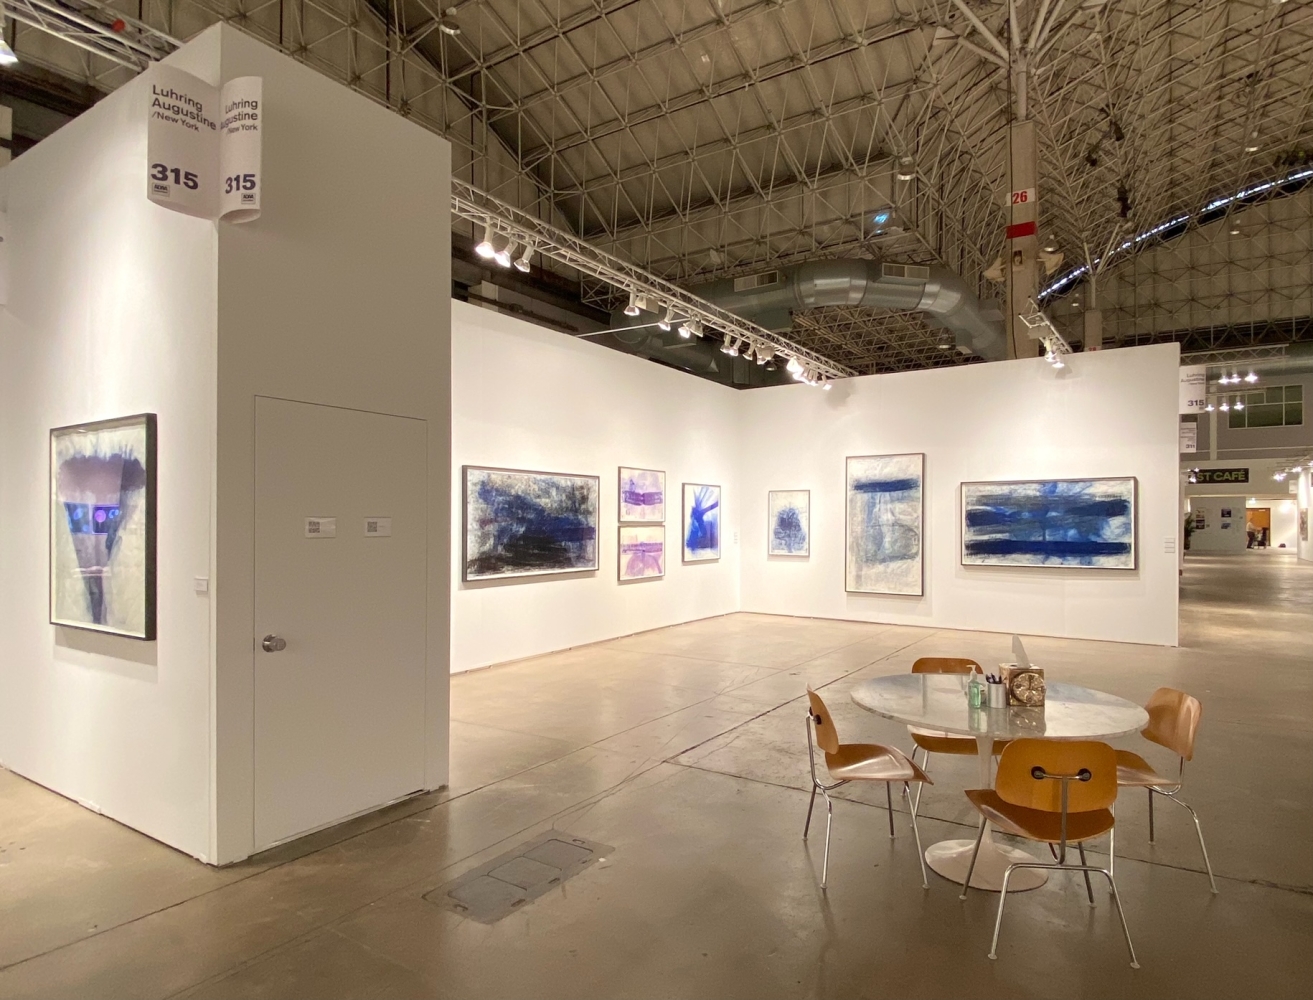 Luhring Augustine
EXPO Chicago, In/Situ
Installation view
2022